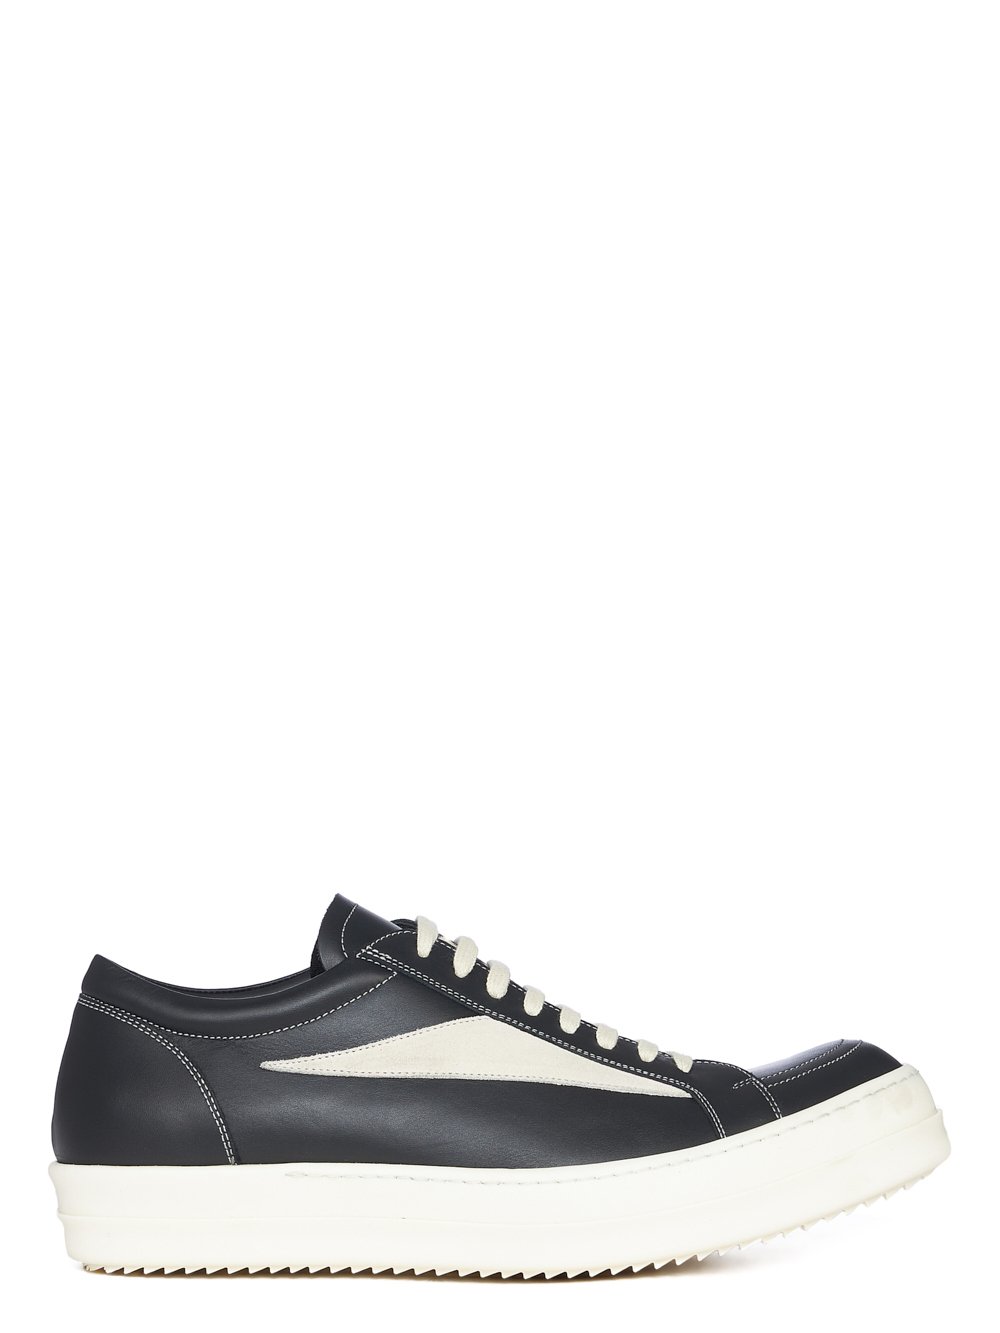 RICK OWENS FW23 LUXOR VINTAGE SNEAKS IN BLACK AND MILK CORTINA GREASE CALF LEATHER AND VELOURS SUEDE